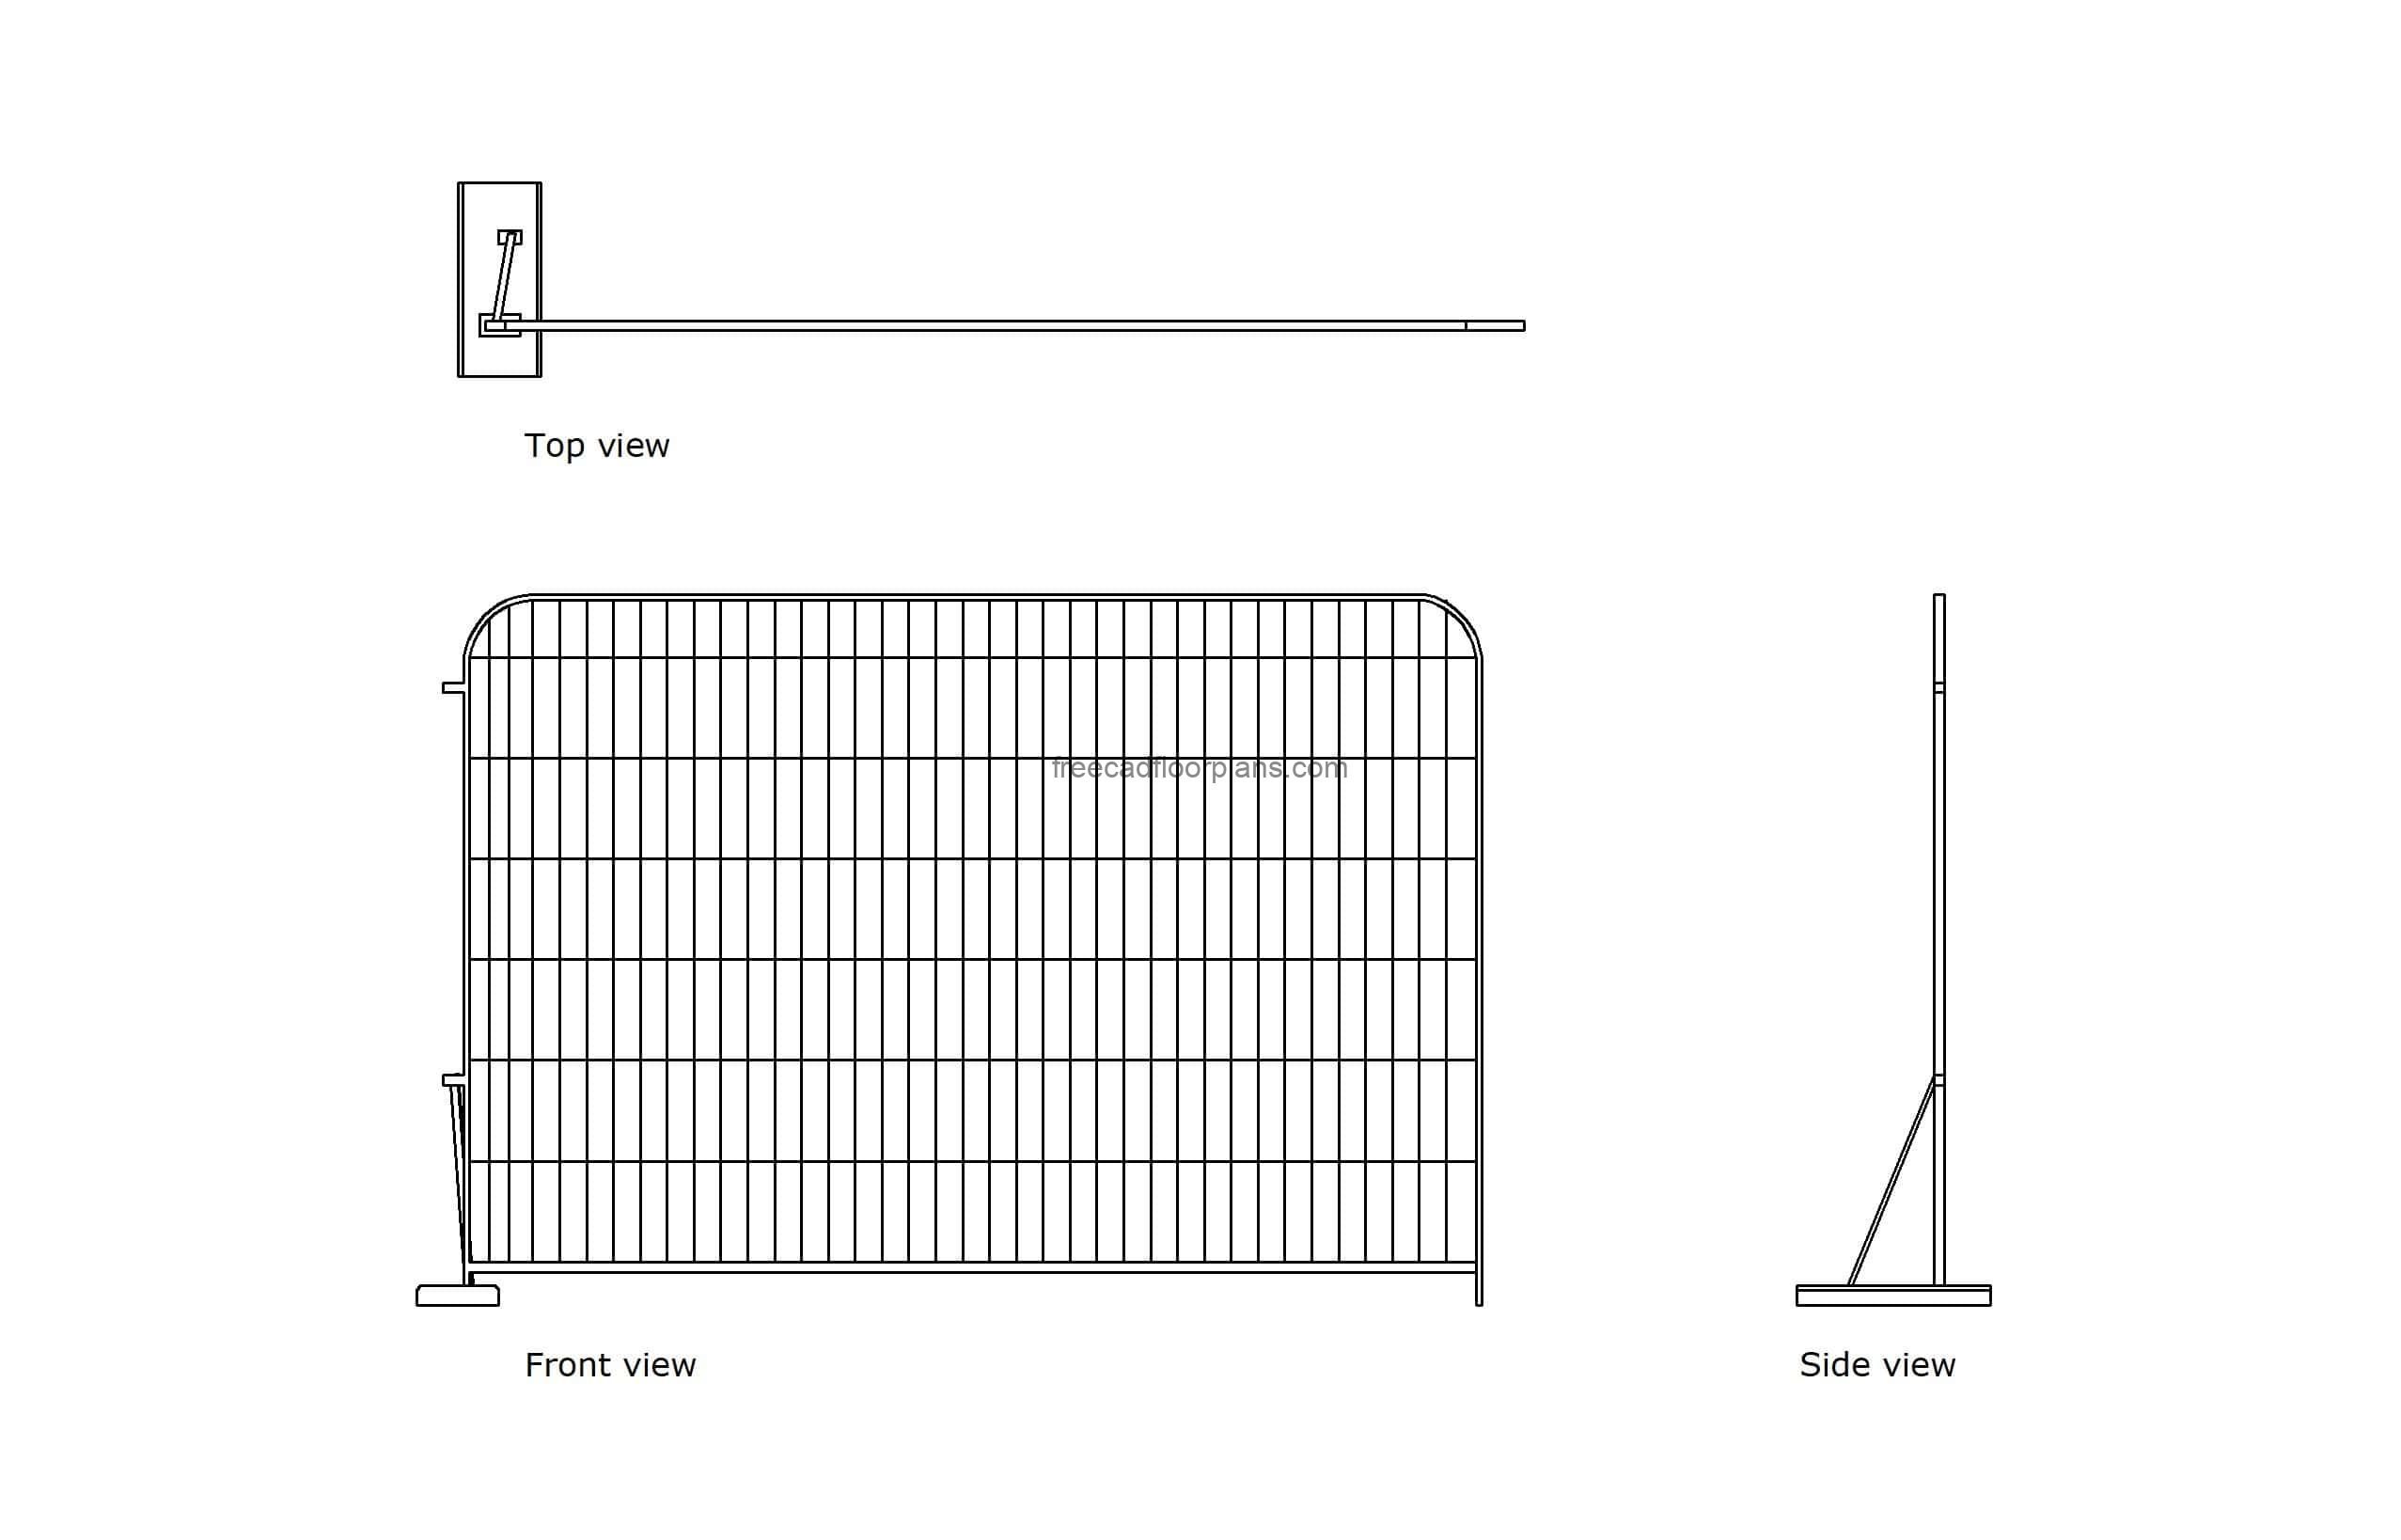 autocad drawing of a heras fence panel, 2d plan and elevation views, dwg file free for download